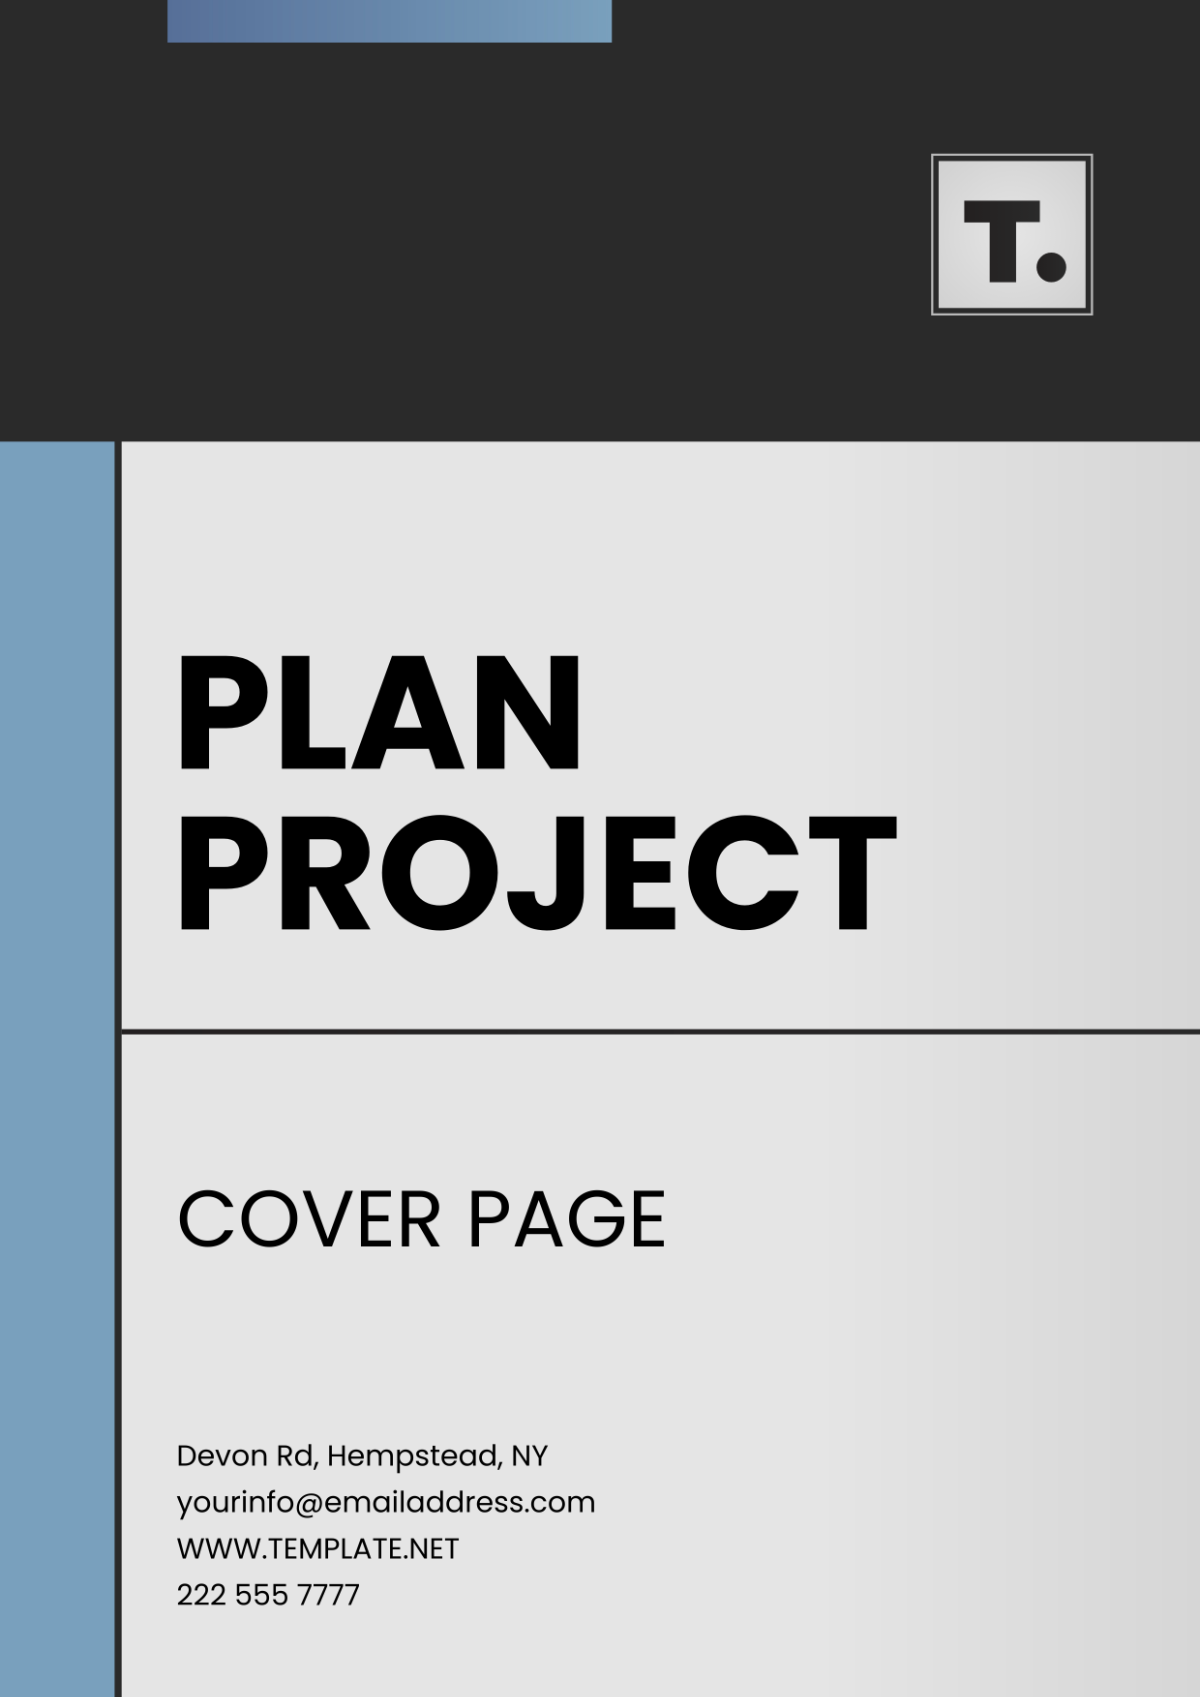 Plan Project Cover Page